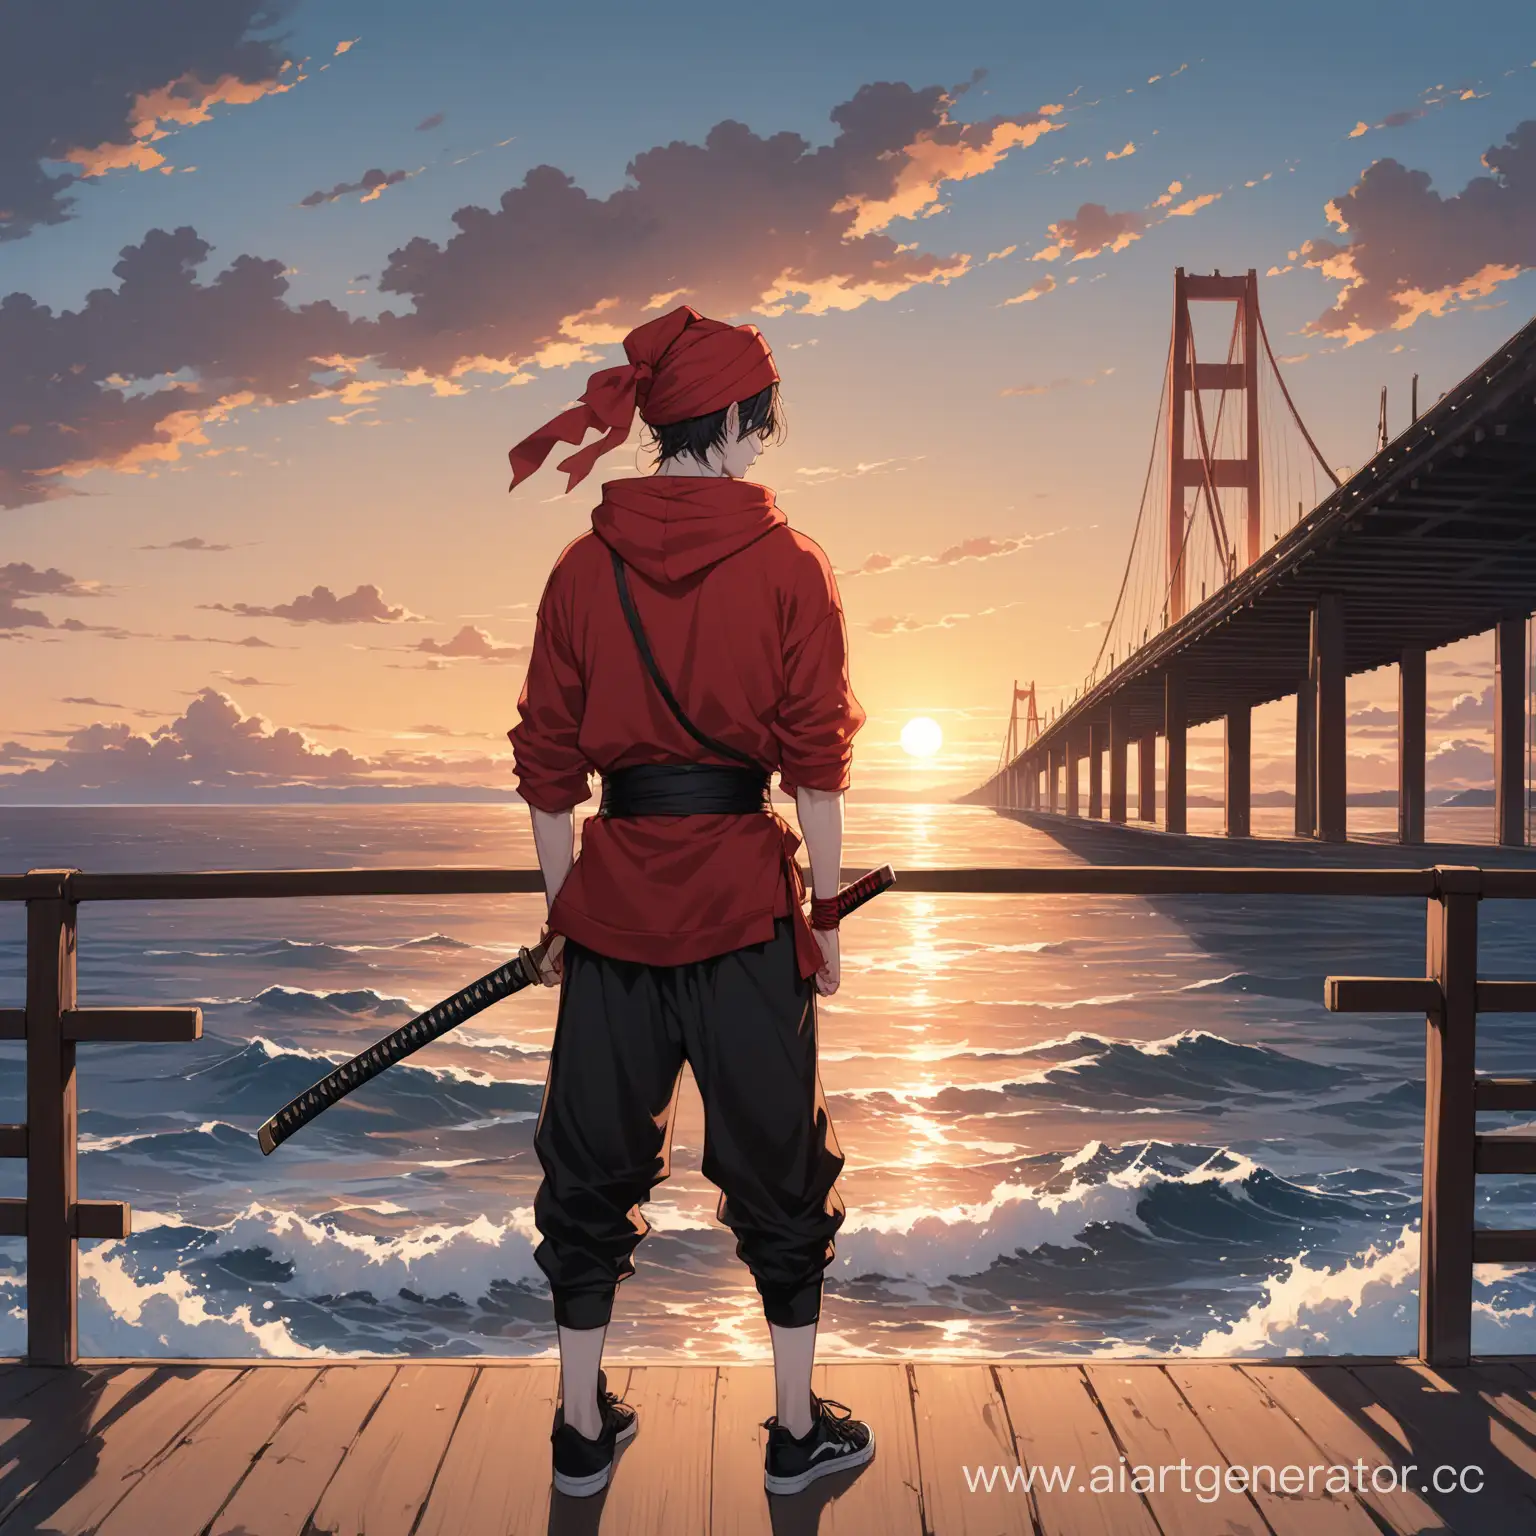 Youthful-Swordsman-at-Dusk-by-the-Sea